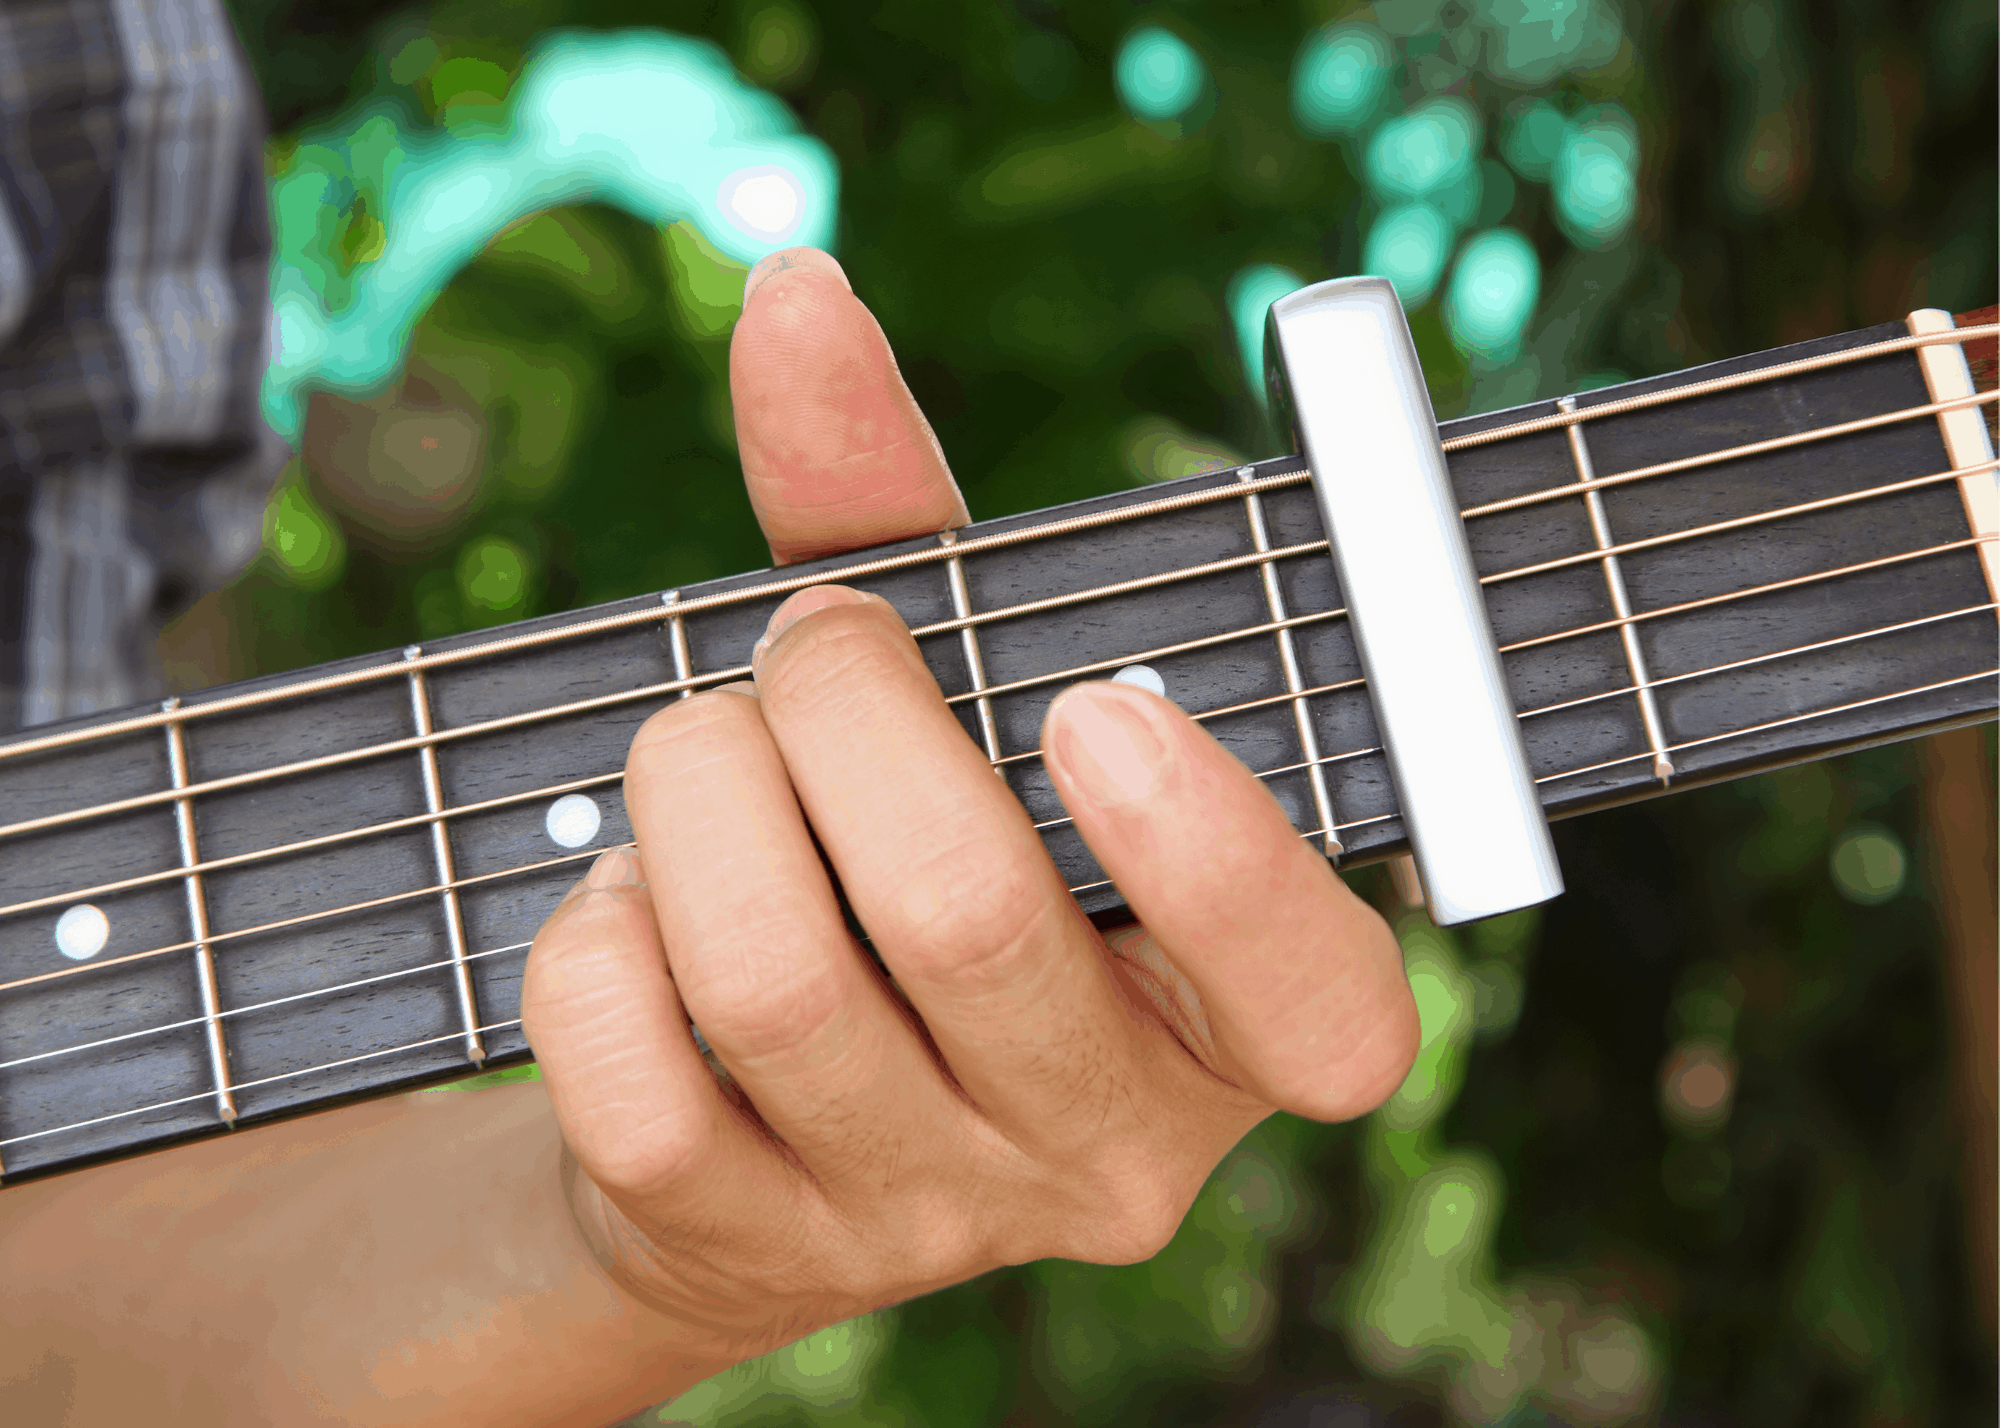 person playing a guitar using a capo